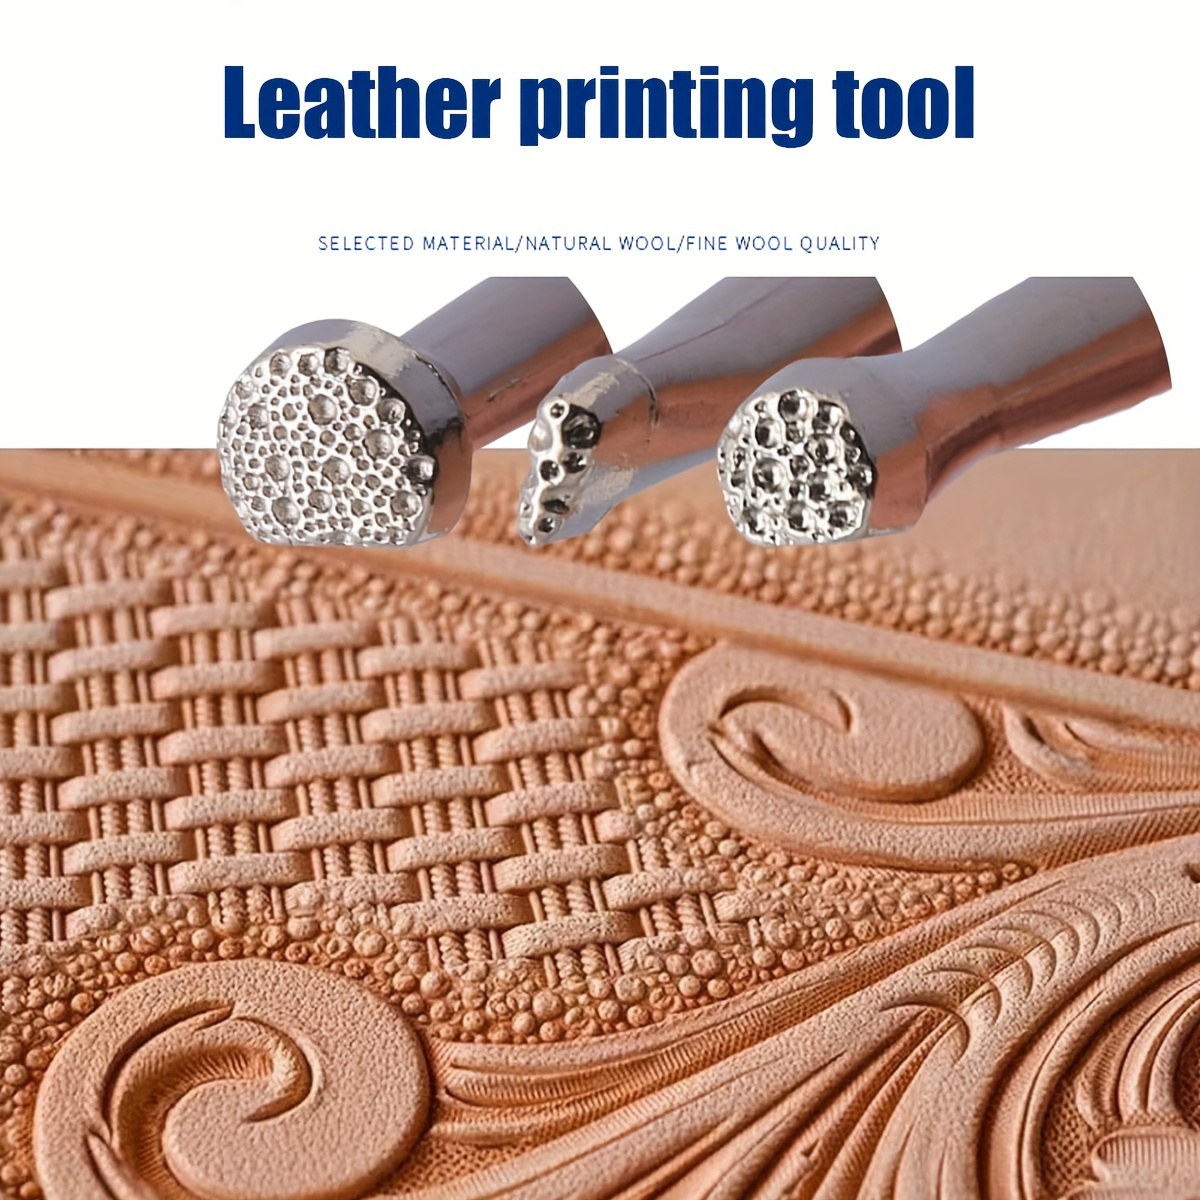 71 PCS Leather Stamping Tools, Leather Stamping Kit with 68 pcs Letters,  Numbers and Patterns, 2 Pcs Leather Punch Tools, Leather Stamp Set Leather